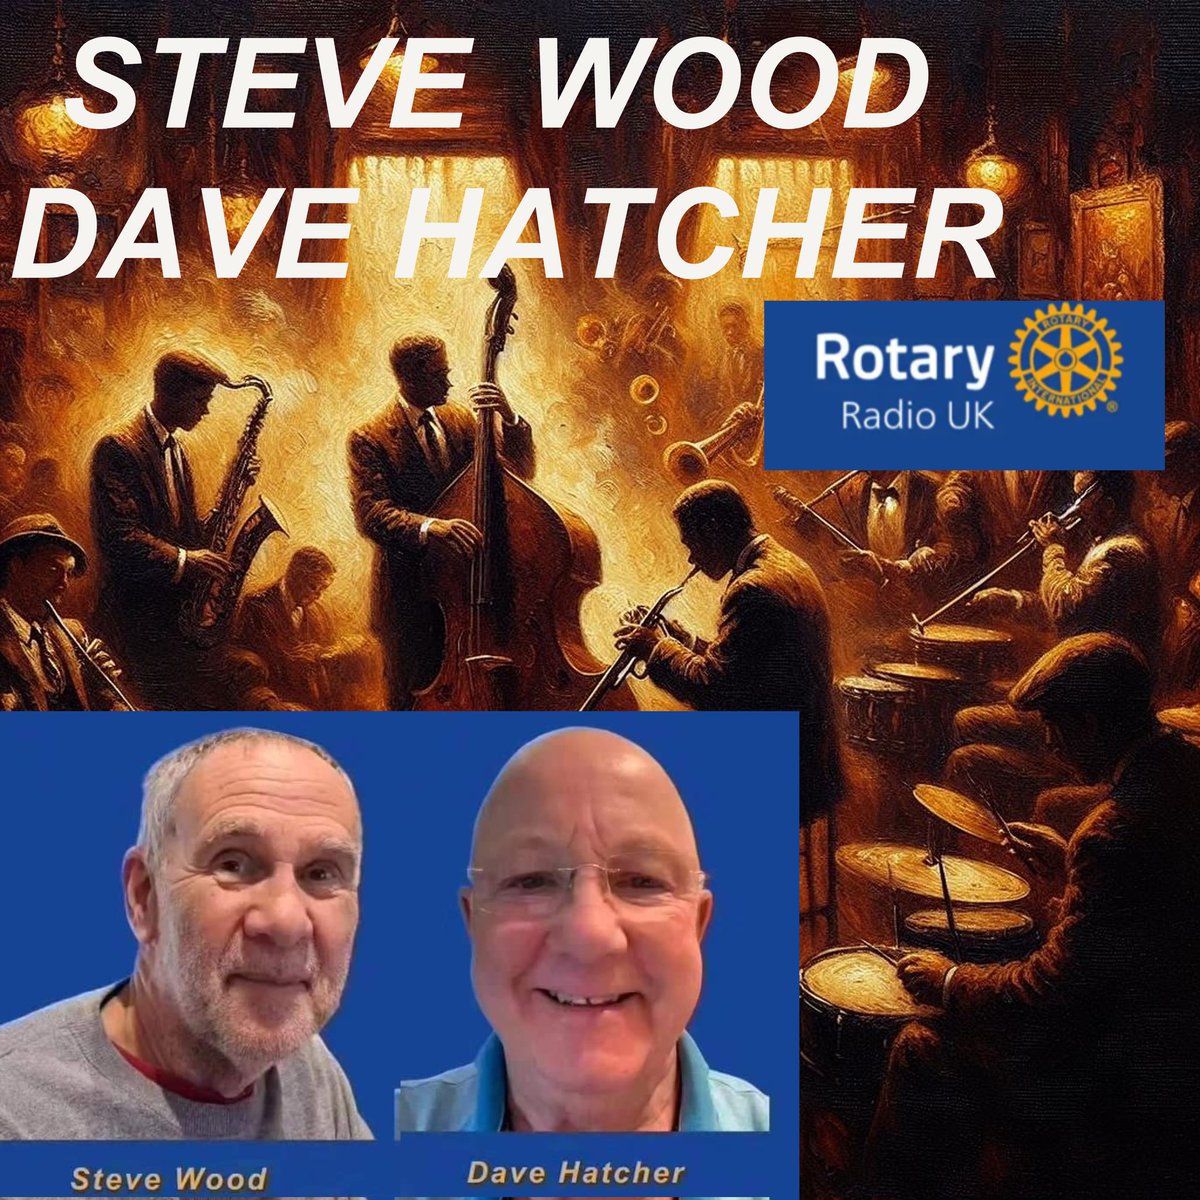 Keeping you company at 10am Steve Wood on Rotary Radio UK. Steve's Album of the week. The Brain teaser lots of chat and good music. It's Dave Hatcher at 2pm with great tunes and the latest Rotary news Online & on Alexa. rotaryradiouk.org.